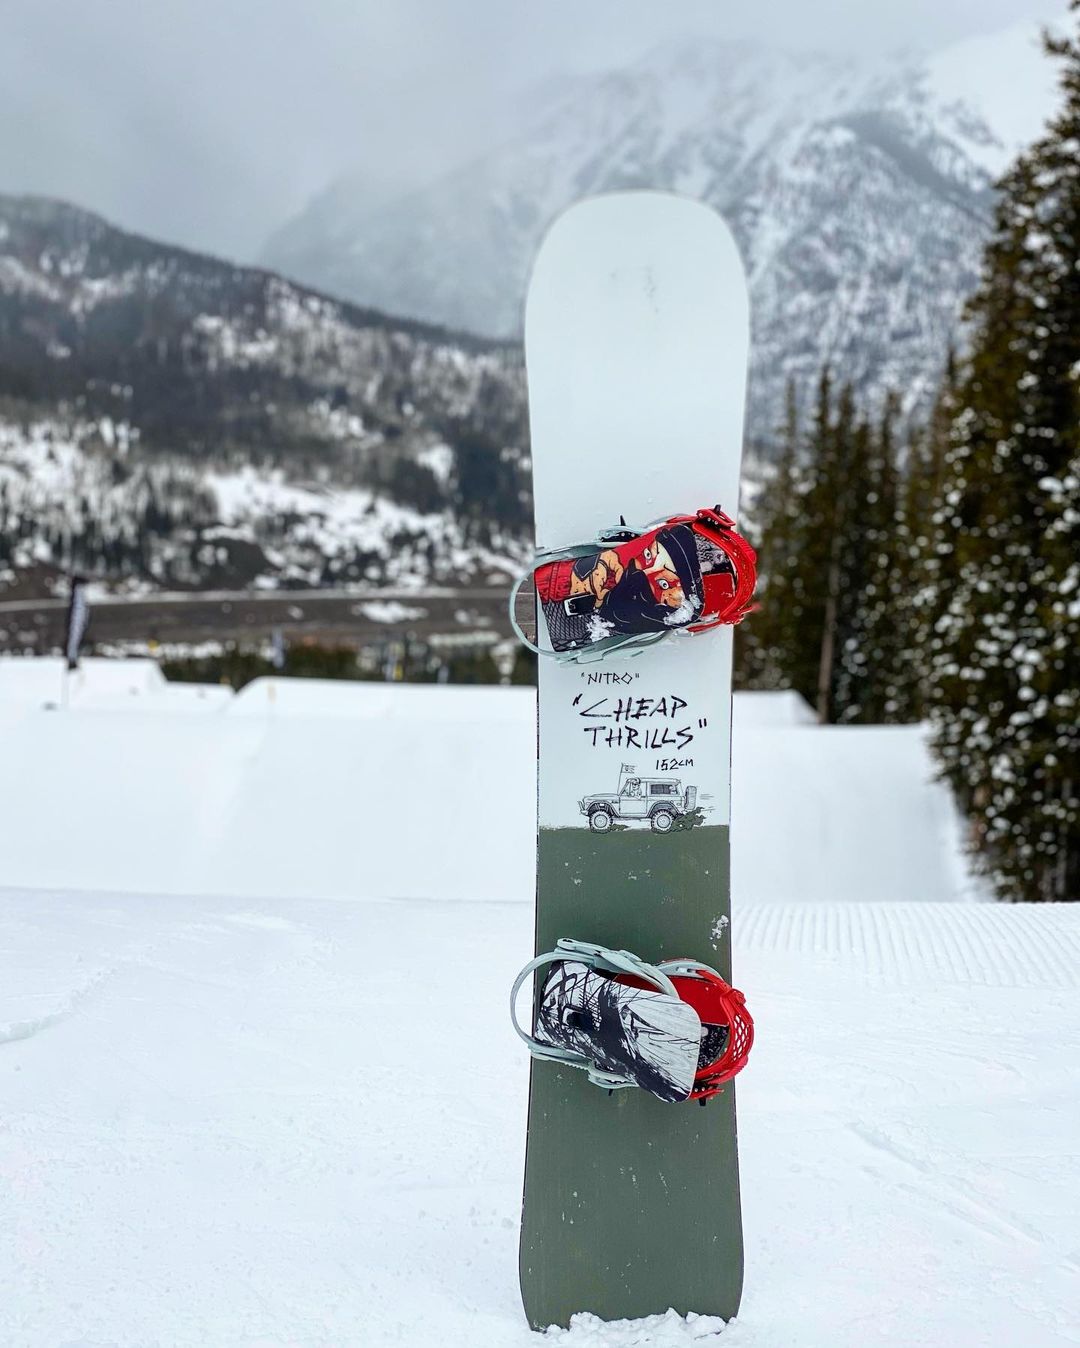 Snowboard Stuck Into the Snow. Photo by Instagram user @boardarchive